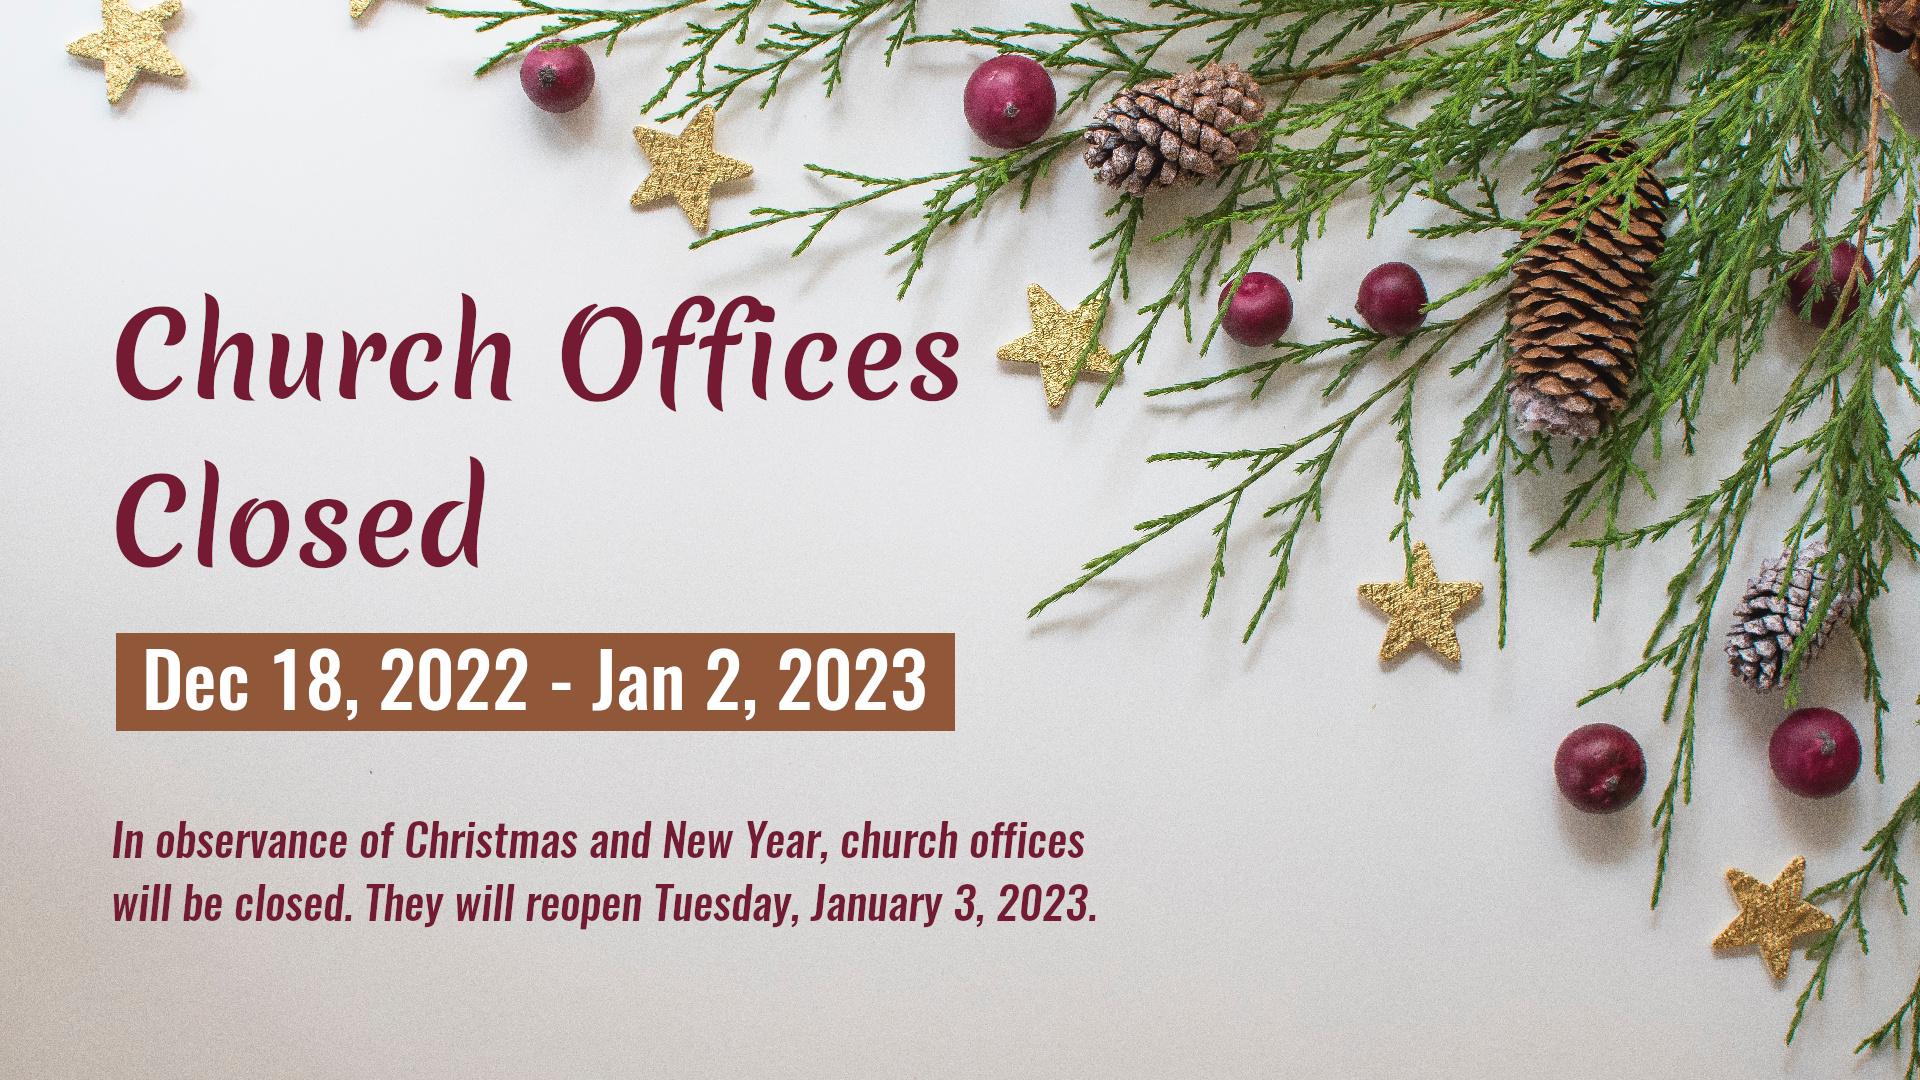 Church offices closed Dec 18, 2022, through Jan 2, 2023 for Christmas and New Year